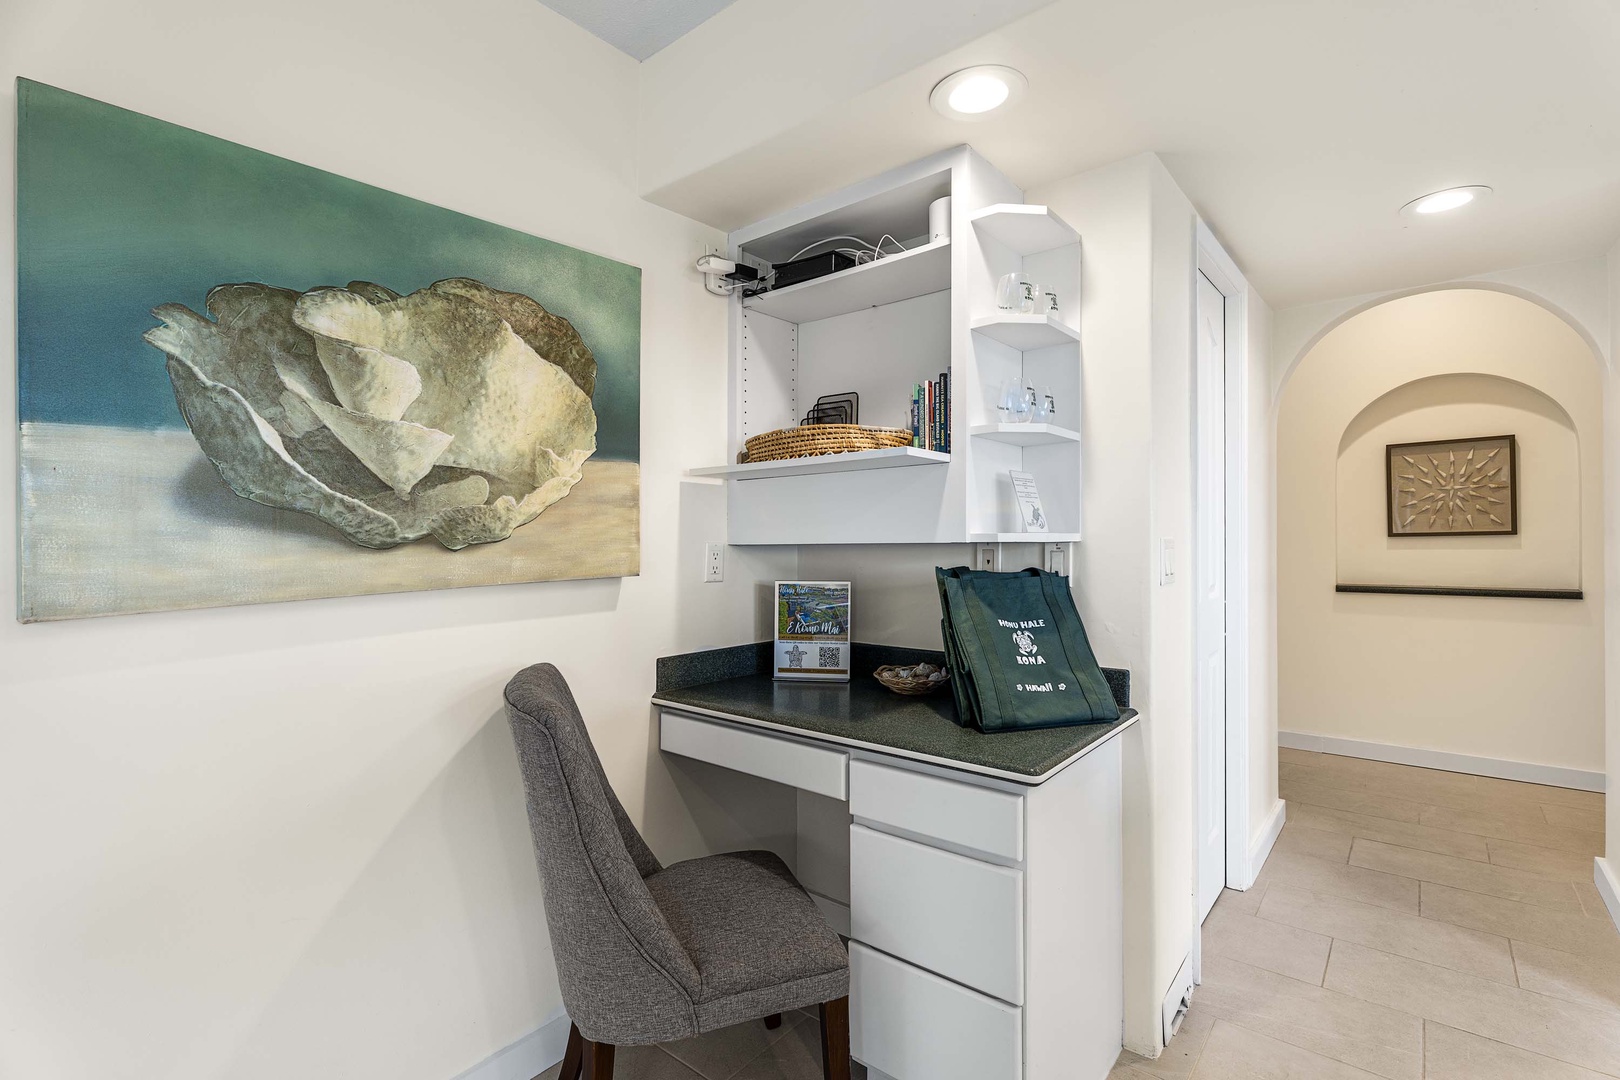 Kailua-Kona Vacation Rentals, Honu Hale - Small desk space just off the kitchen makes for a great work space